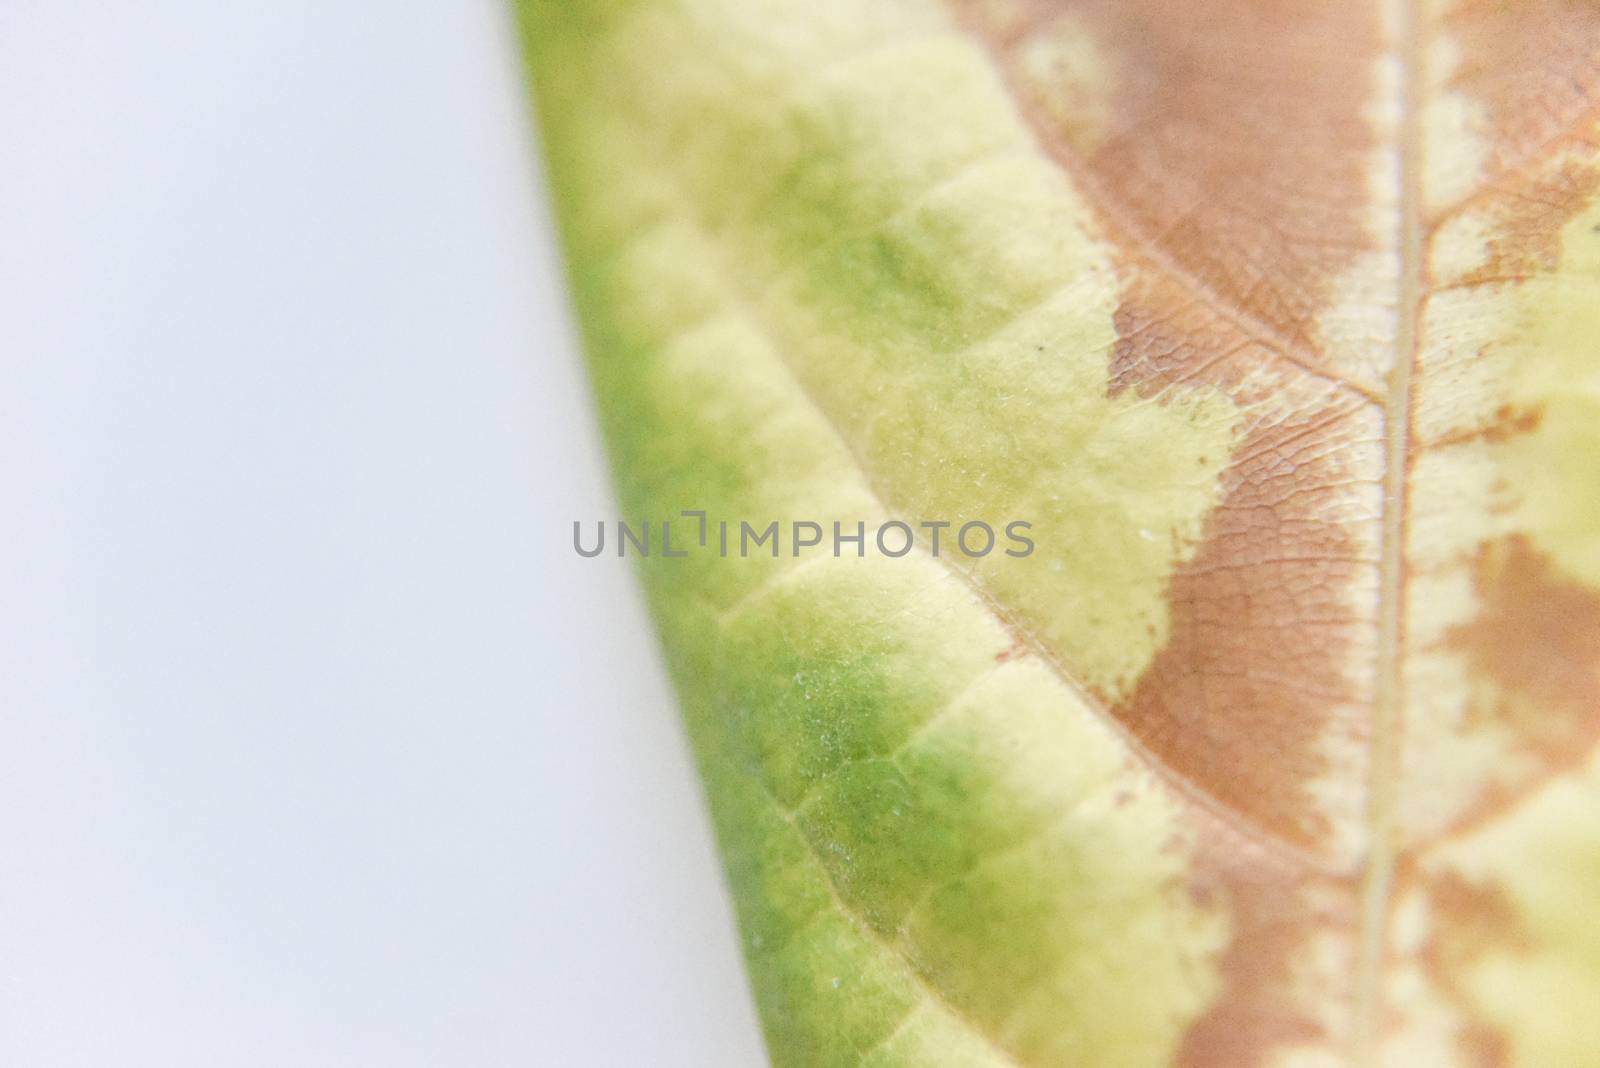 selective focus at the fallen avocado leaves with dried spots, studio shot